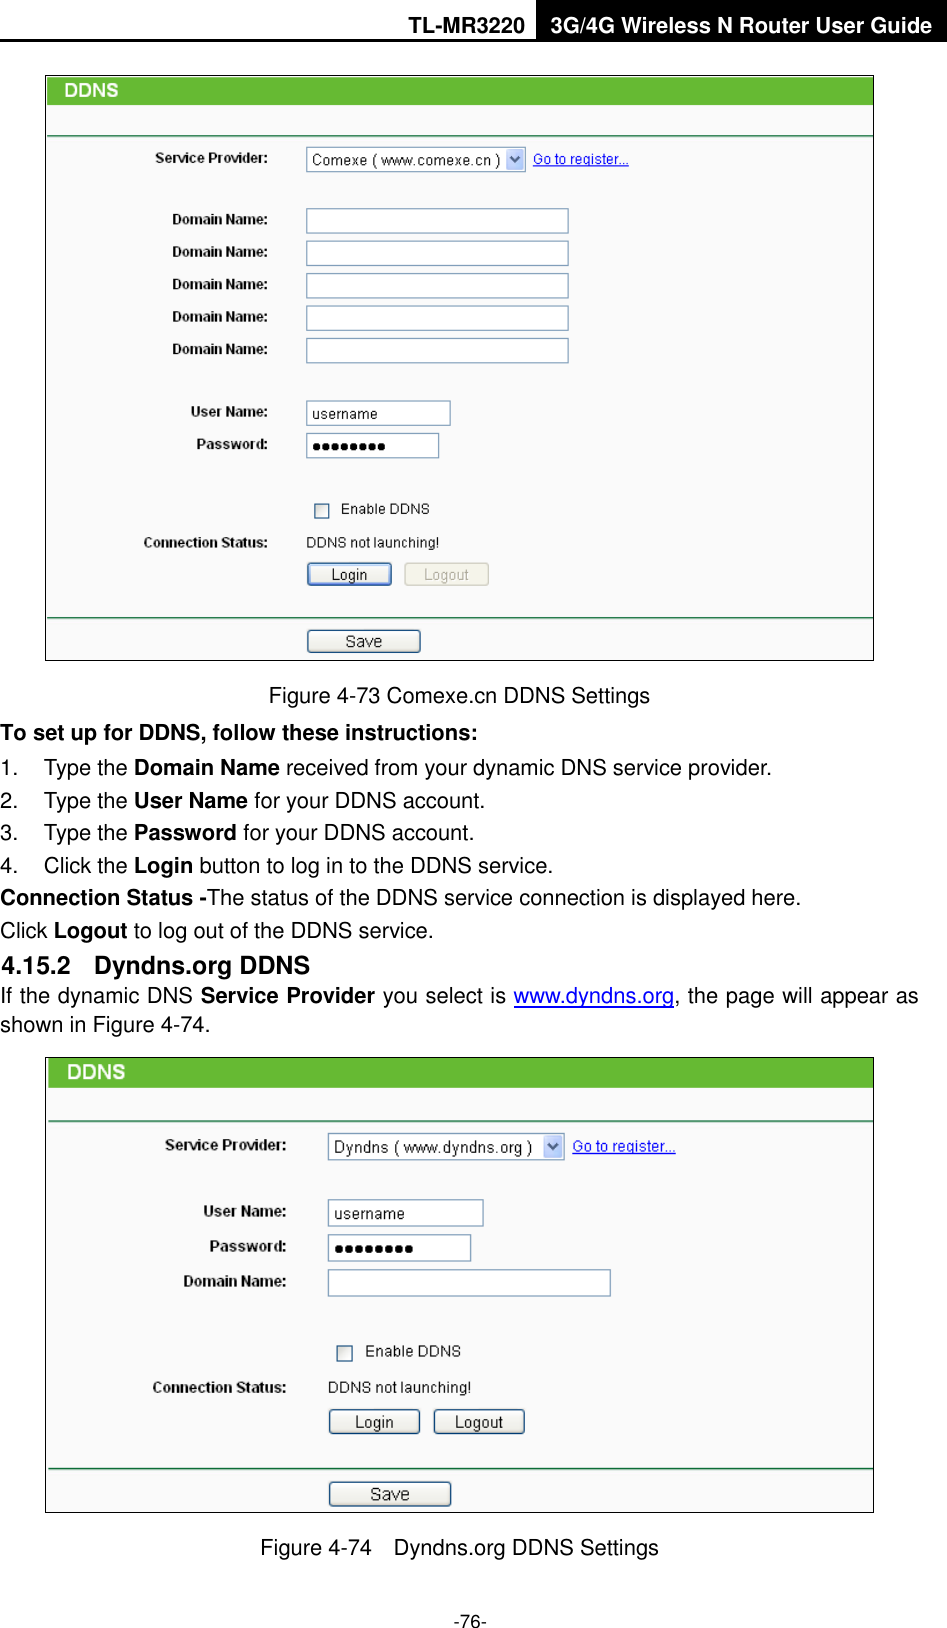 TL-MR3220 3G/4G Wireless N Router User Guide  -76-  Figure 4-73 Comexe.cn DDNS Settings To set up for DDNS, follow these instructions: 1.  Type the Domain Name received from your dynamic DNS service provider.     2.  Type the User Name for your DDNS account.   3.  Type the Password for your DDNS account.   4.  Click the Login button to log in to the DDNS service. Connection Status -The status of the DDNS service connection is displayed here. Click Logout to log out of the DDNS service.   4.15.2  Dyndns.org DDNS If the dynamic DNS Service Provider you select is www.dyndns.org, the page will appear as shown in Figure 4-74.  Figure 4-74    Dyndns.org DDNS Settings 